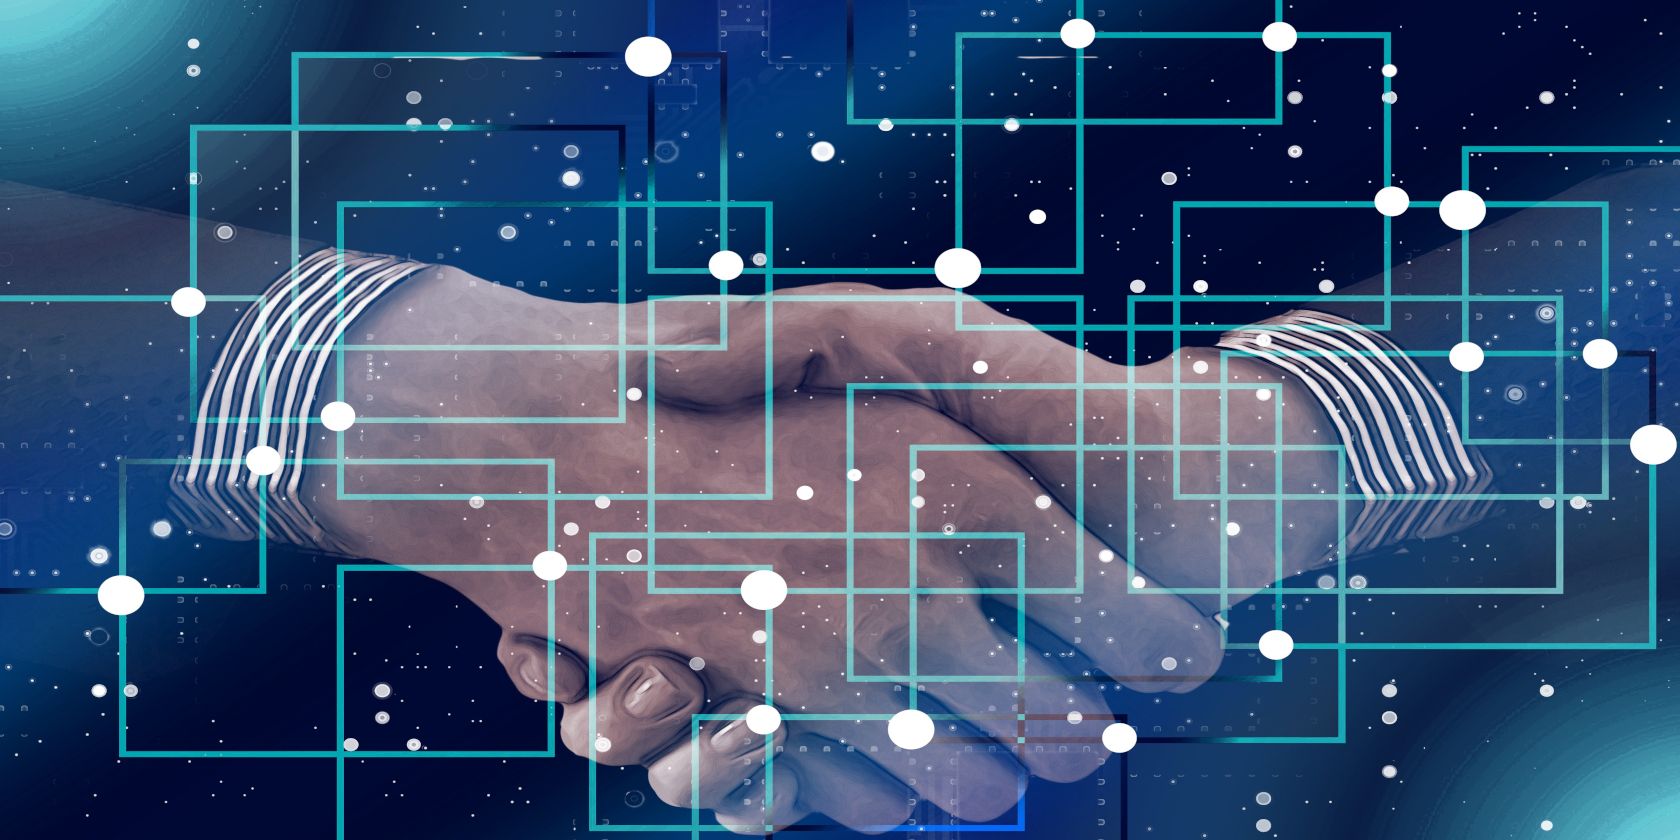 An image showing two people joining hands behind nodes